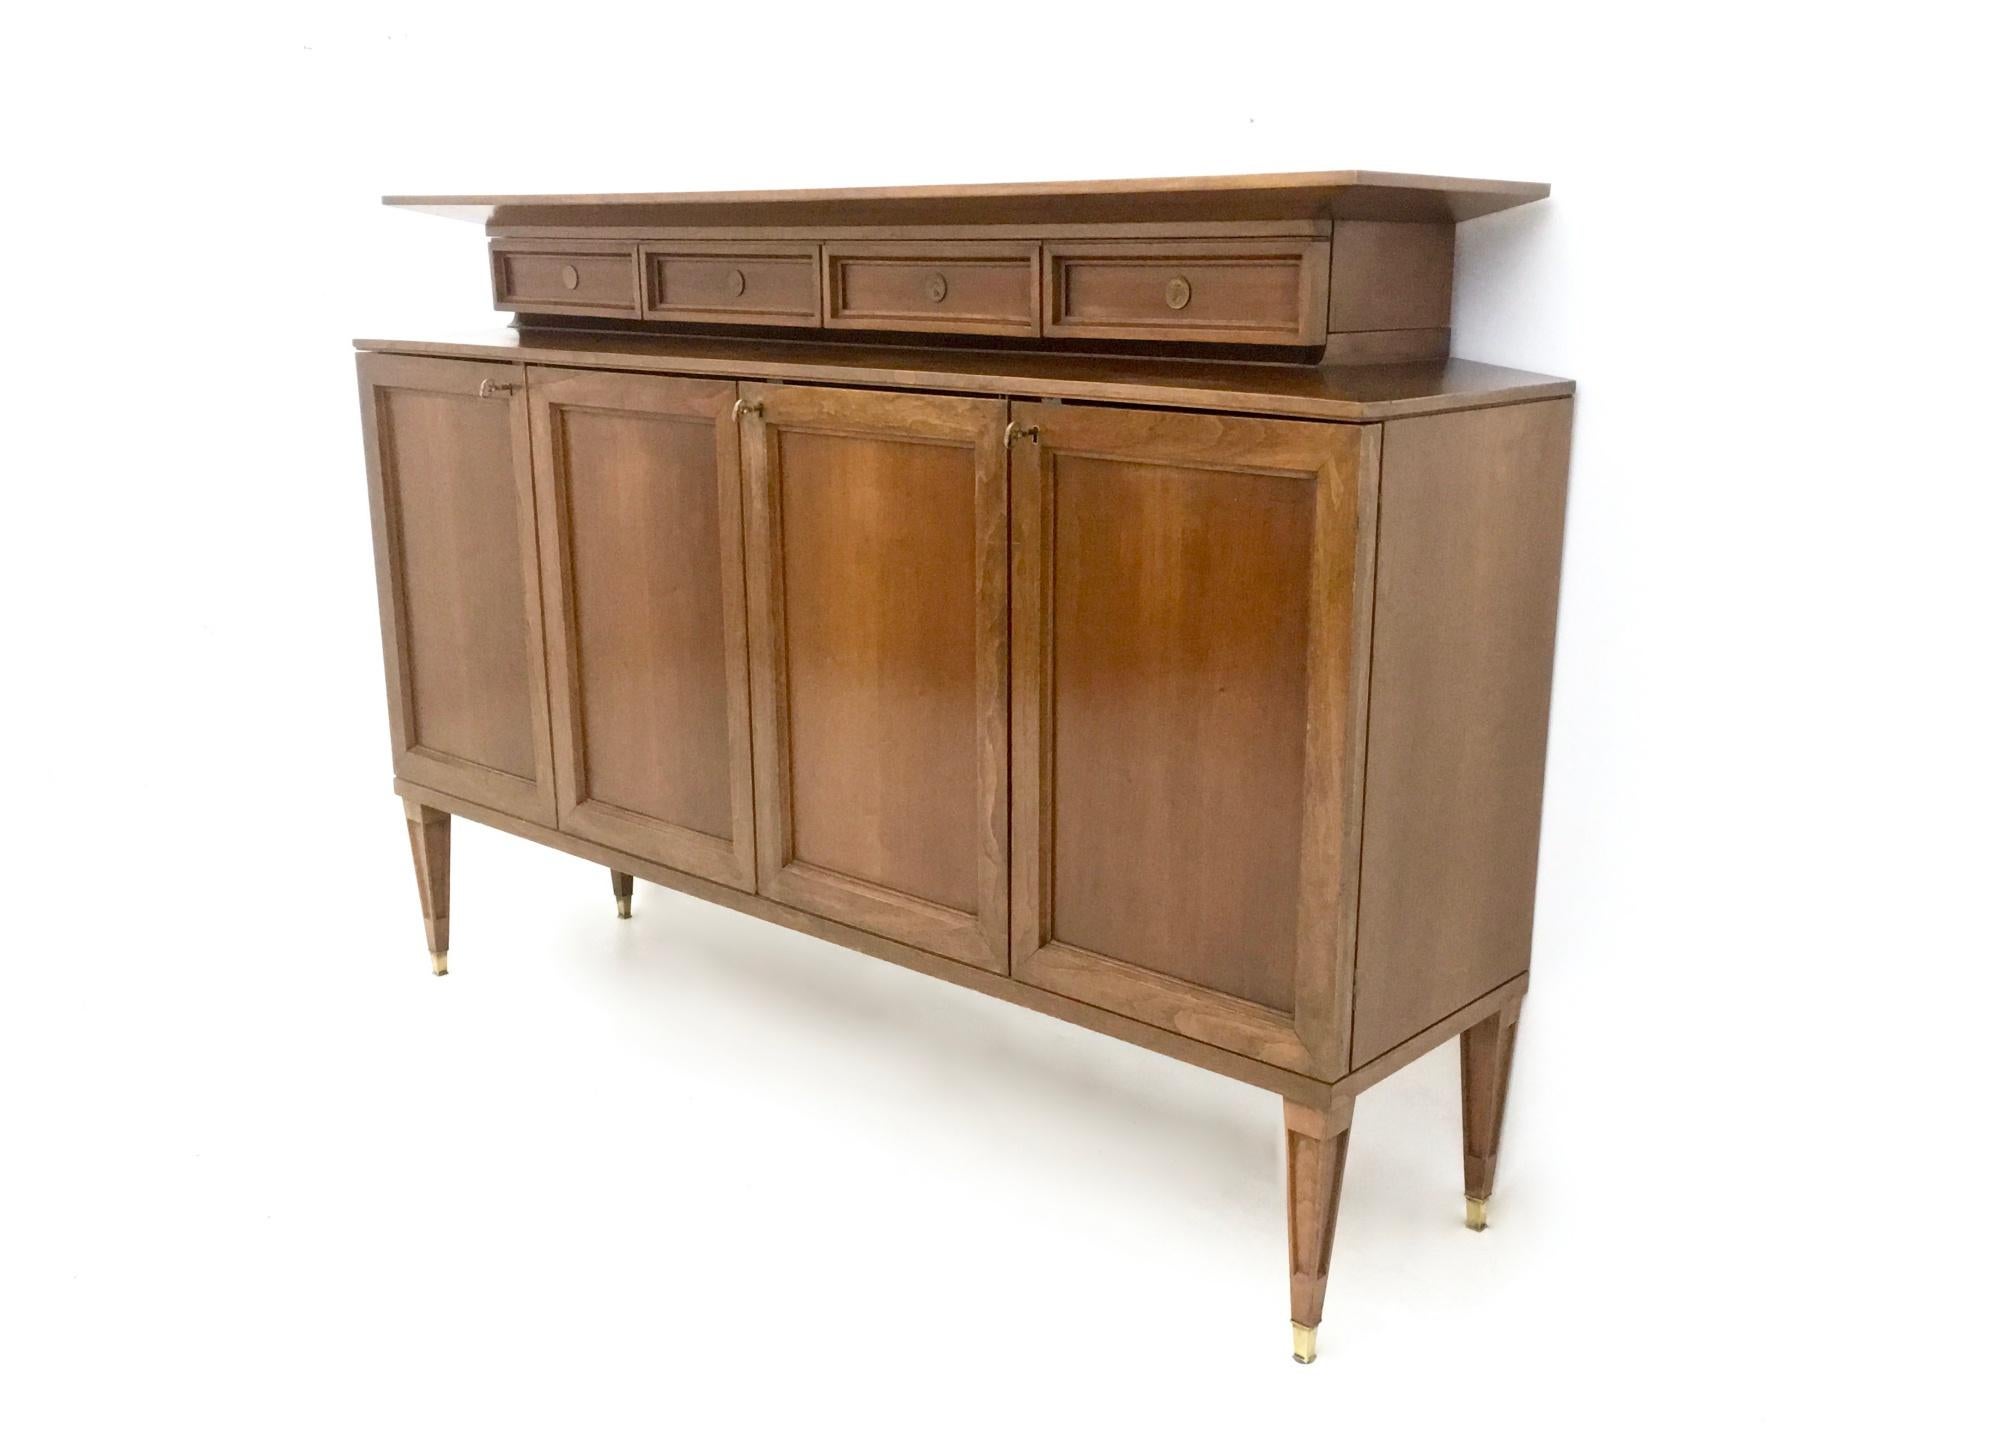 1950s. 
This cabinet is made in walnut and features brass details, walnut interiors and glass shelves. 
It is a vintage piece, therefore it might show slight traces of use, but it can be considered as in excellent original condition and ready to